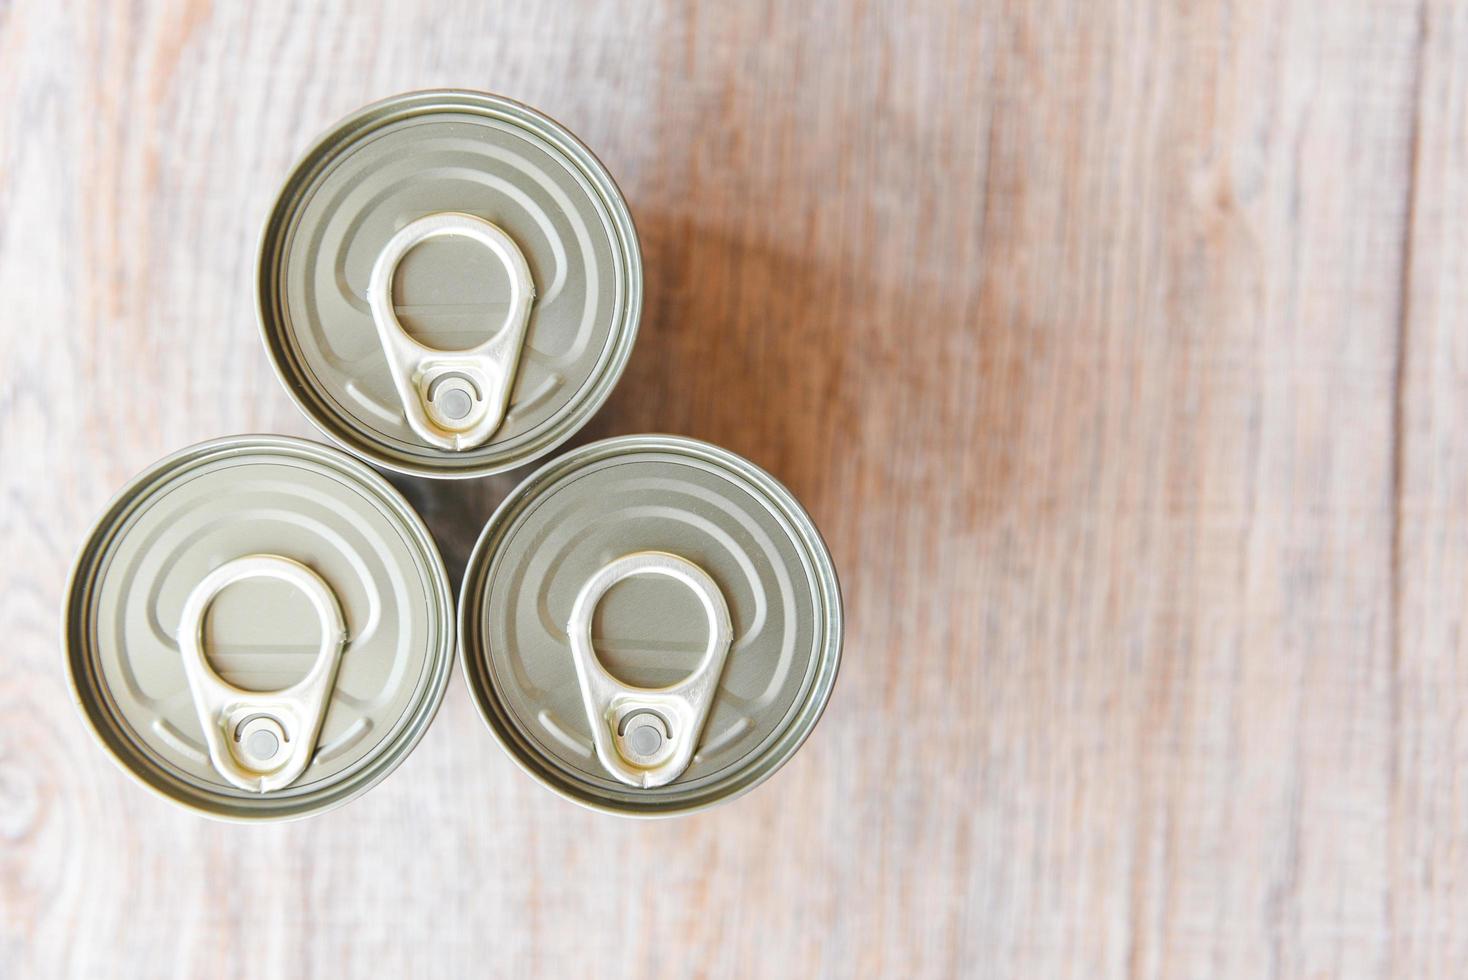 Canned food in metal cans on wooden background , top view canned goods non perishable food storage goods in kitchen home or for donations photo